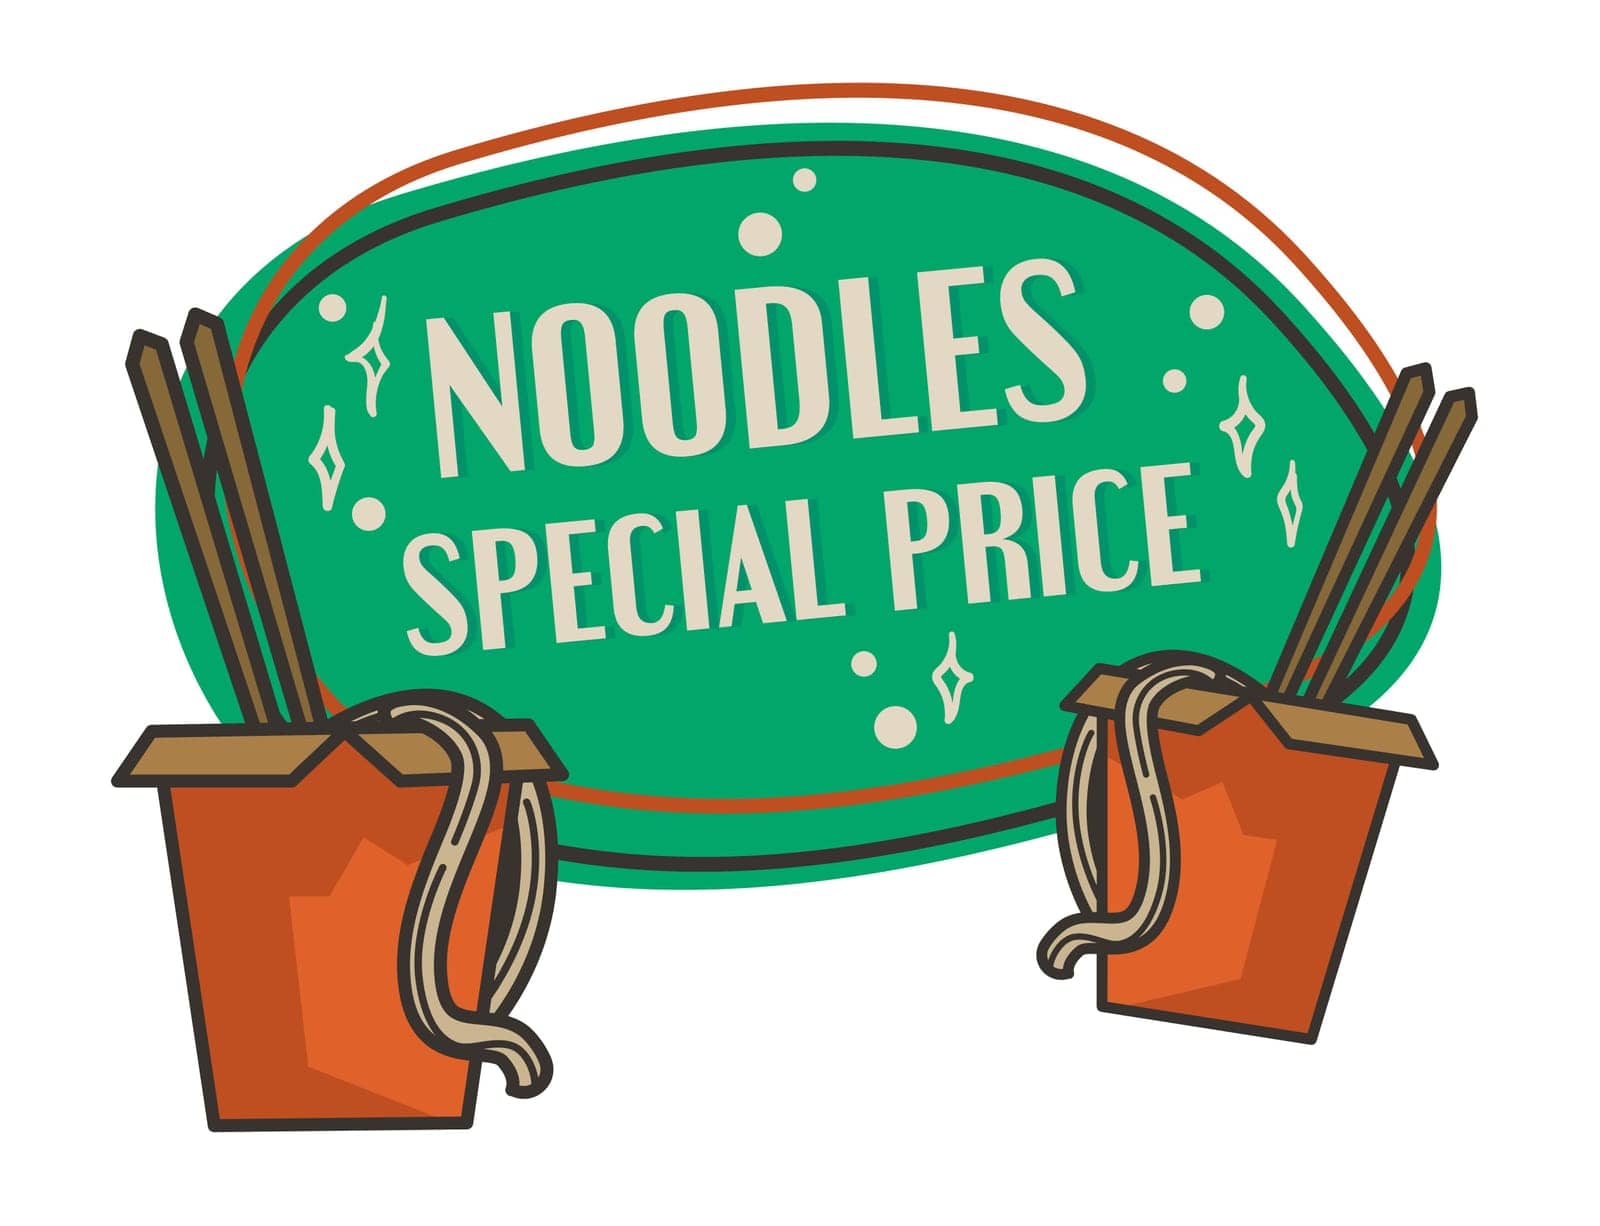 Noodles special price, isolated label or logotype of store or shop, diner or restaurant with asian cuisine and dishes. Tasty meal ready for delivery, breakfast or lunch. Vector in flat style